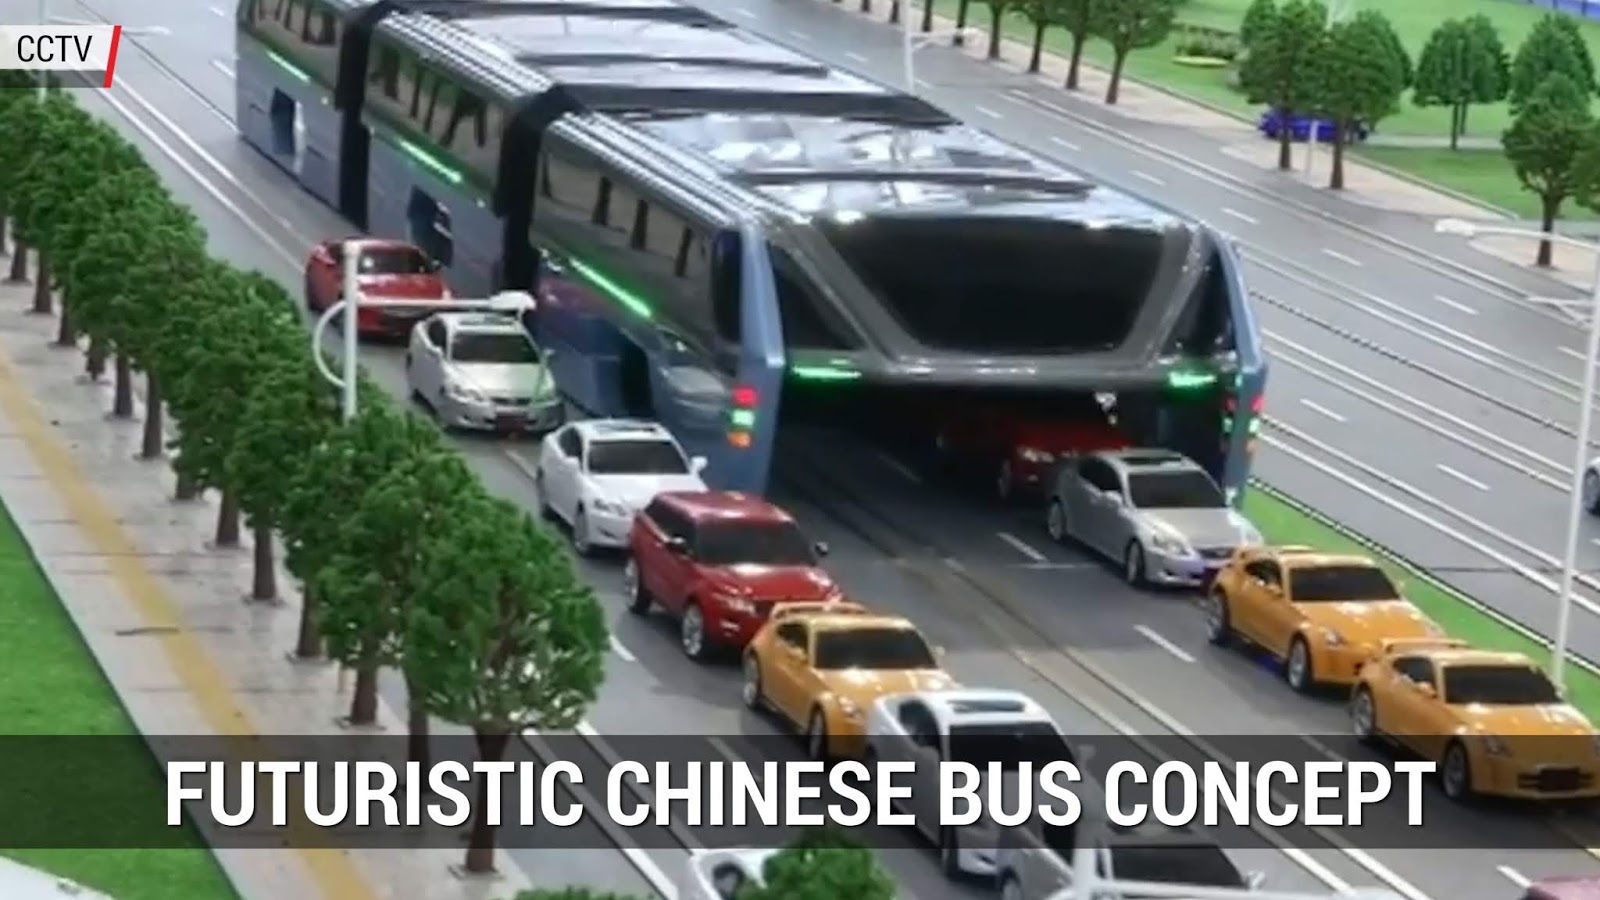 The Story Behind The Chinese Bus Concept Which Turned Out To Be A Scam